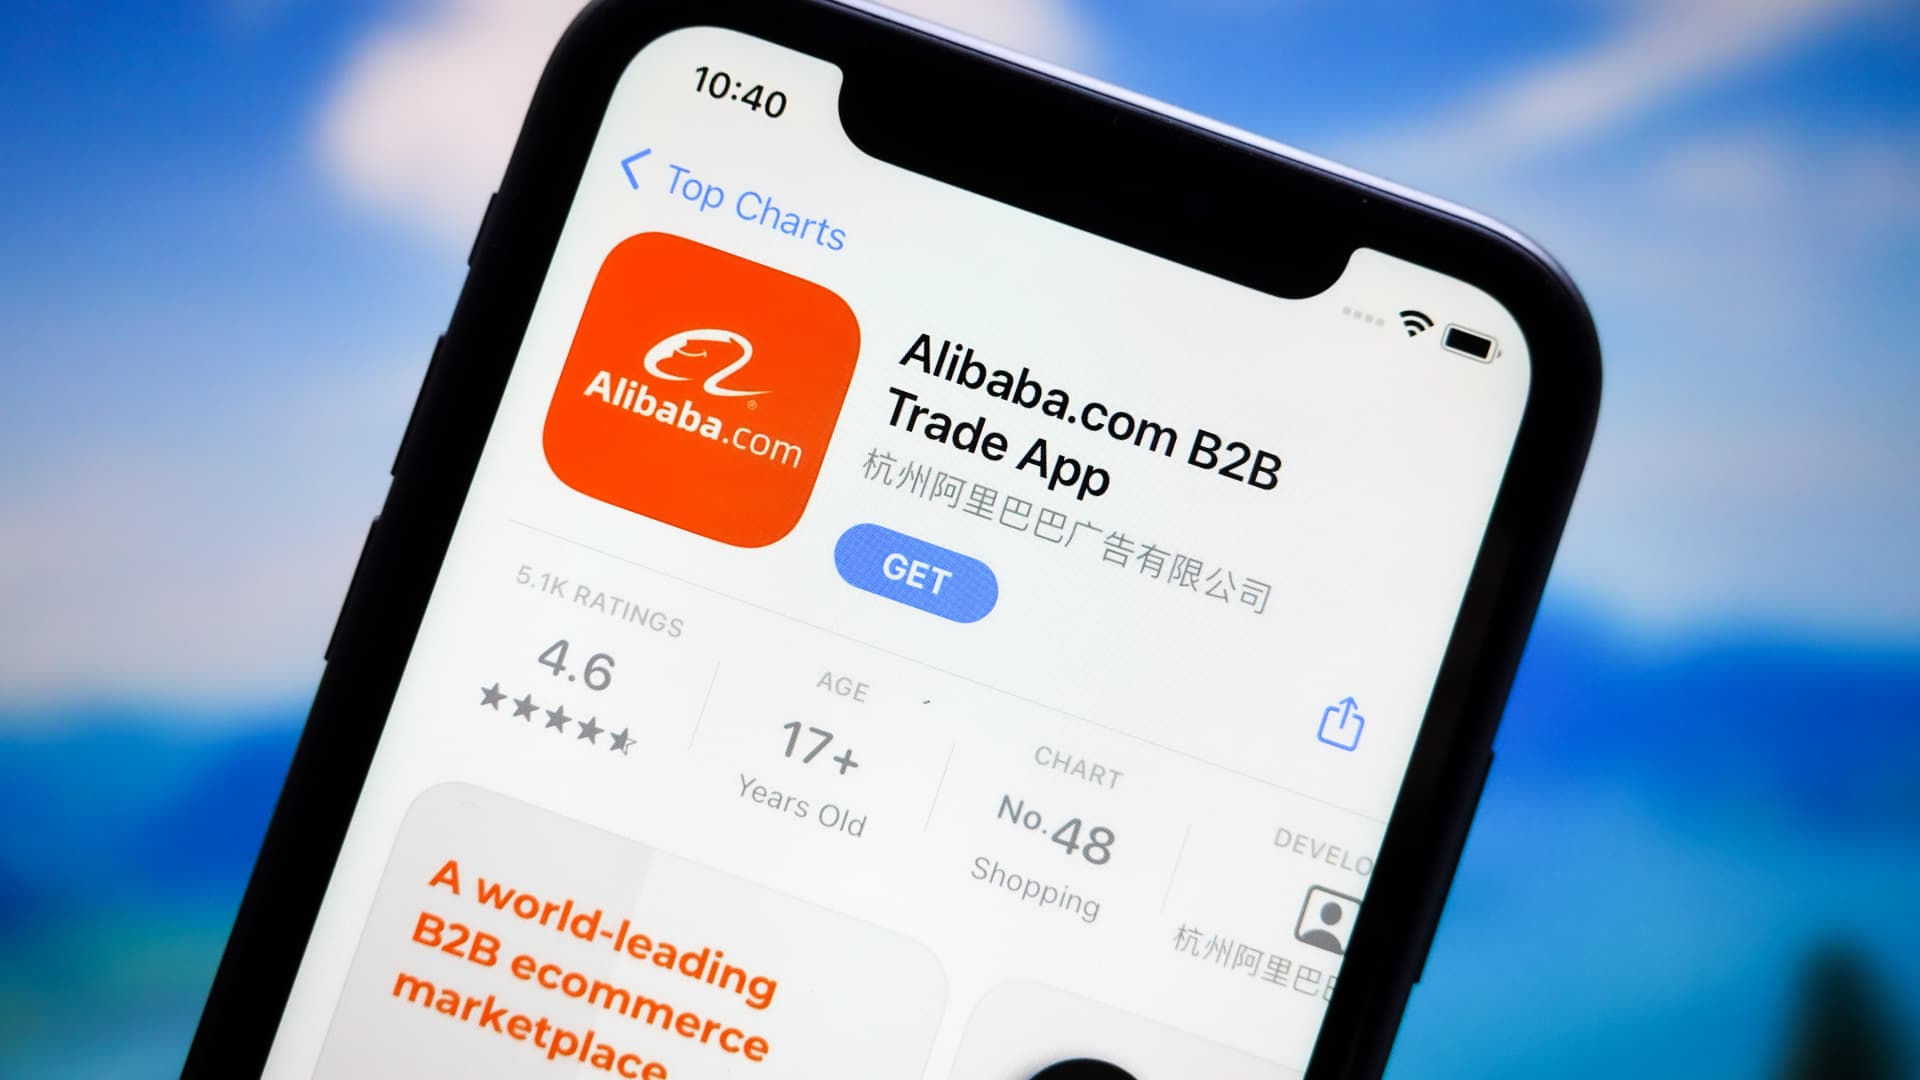 China's Alibaba is seducing European and American small businesses as it goes global